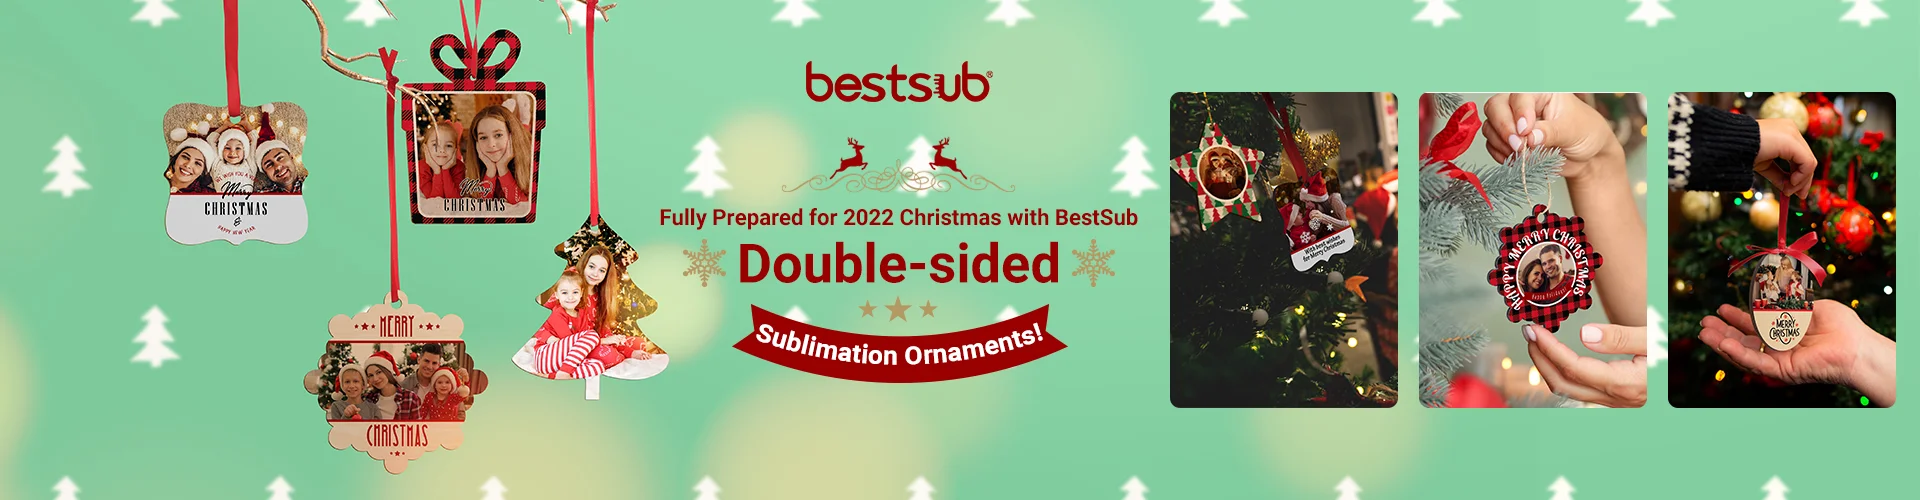 2022-04-26_Fully_Prepared_for_2022_Christmas_with_BestSub_Double-sided_Sublimation_Ornaments_new_web_1